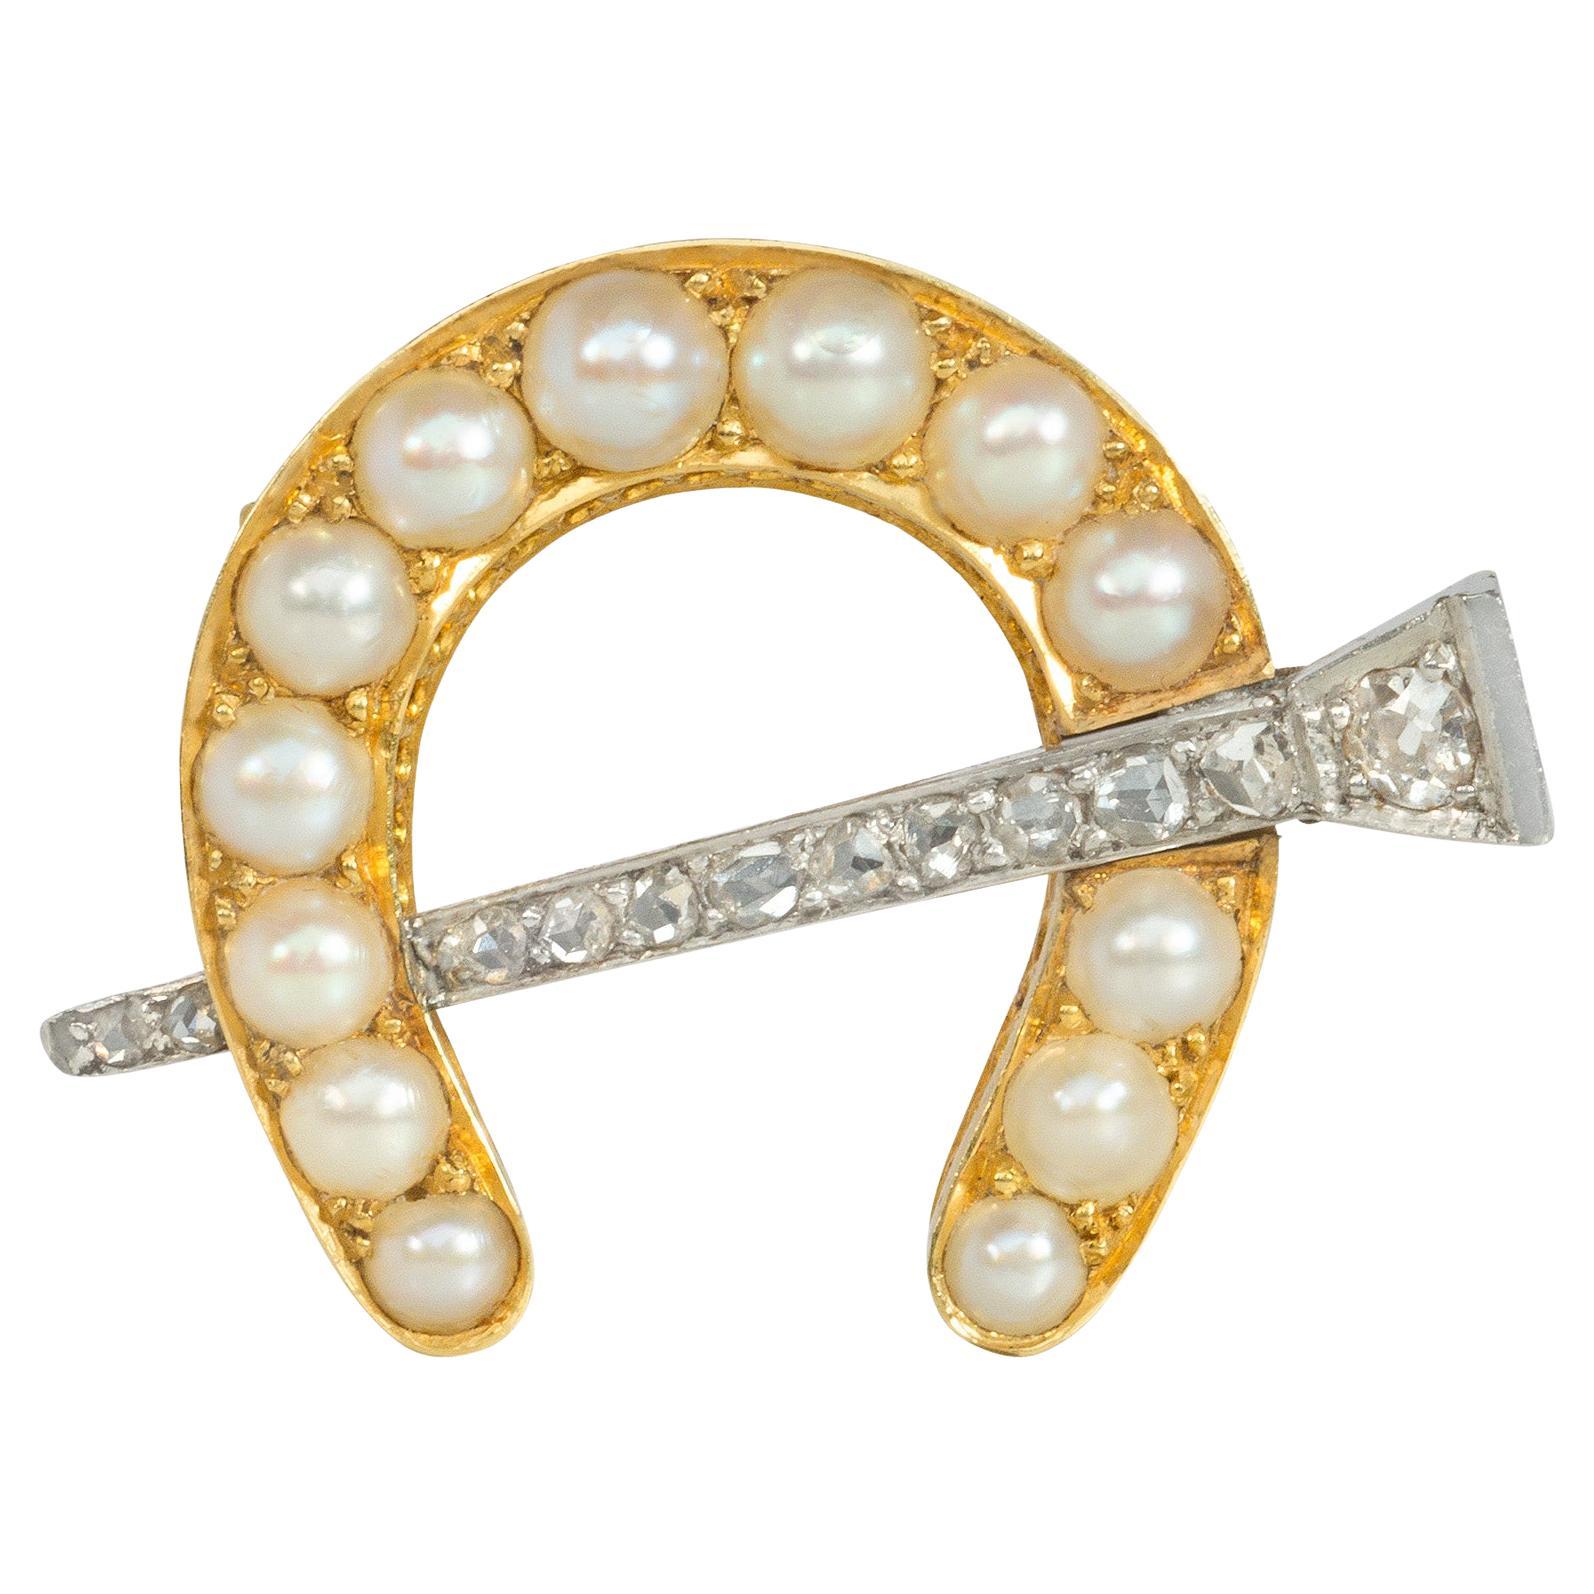 Antique Gold and Pearl Horseshoe Brooch with Diamond-Set Nail and Pendant Loop For Sale